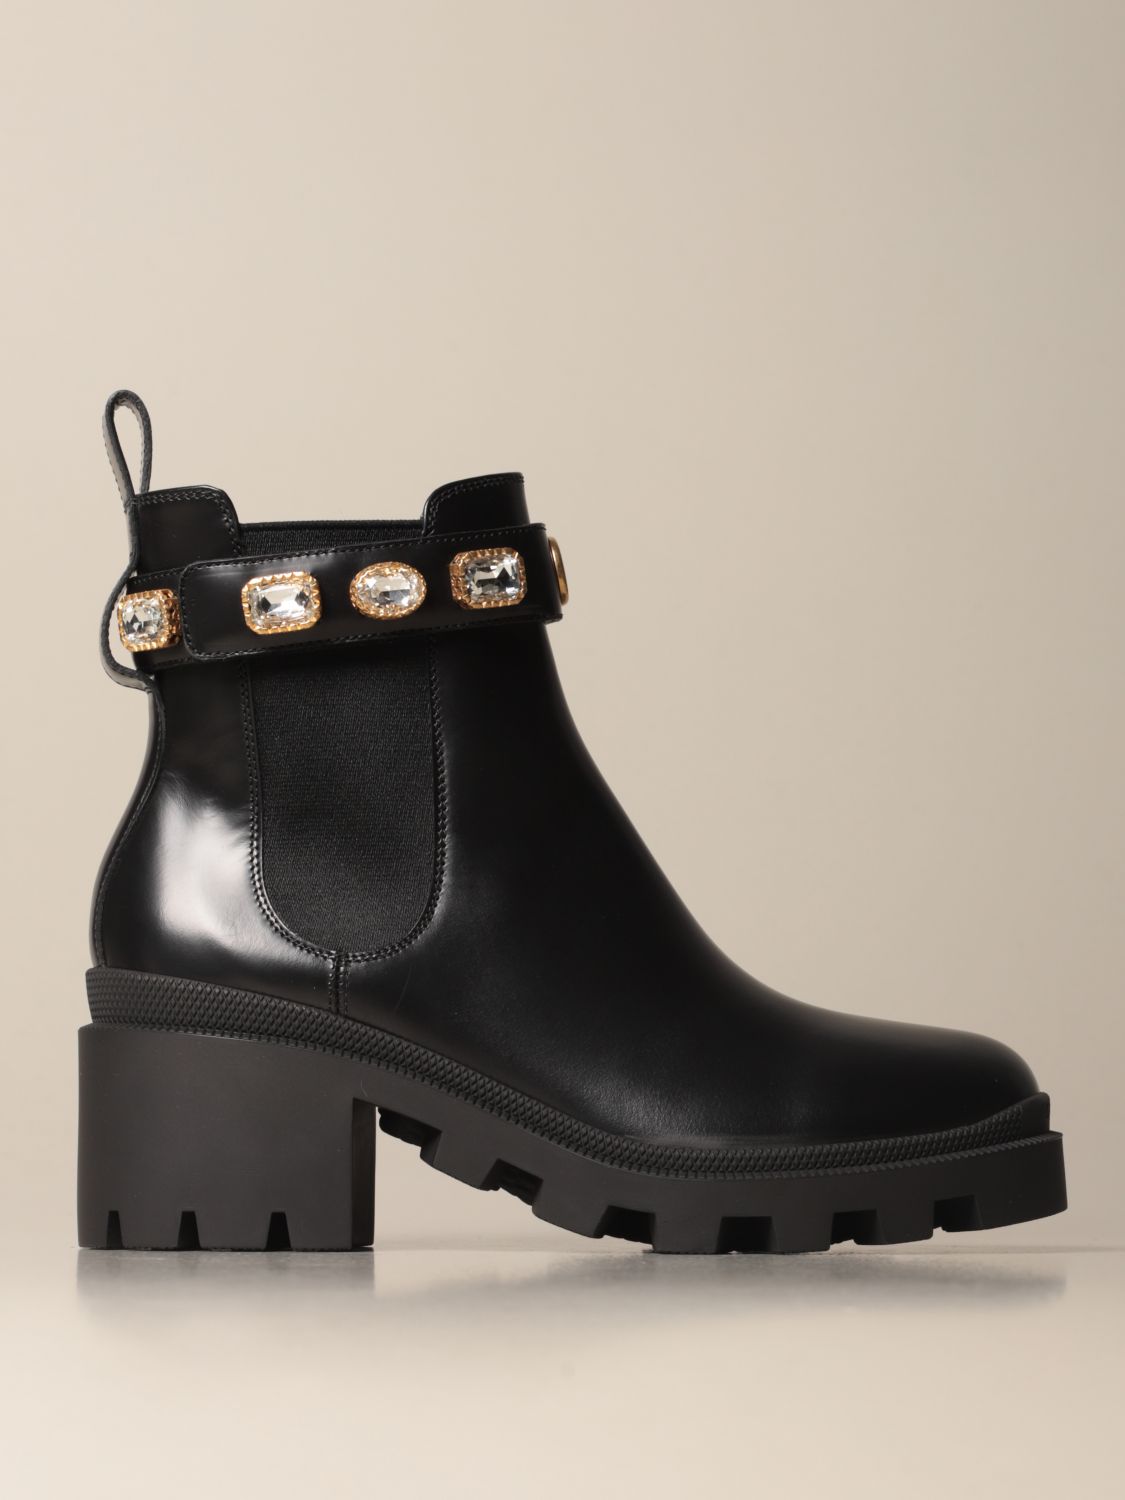 GUCCI: leather ankle boot with rhinestone strap - Black | Flat Booties ...